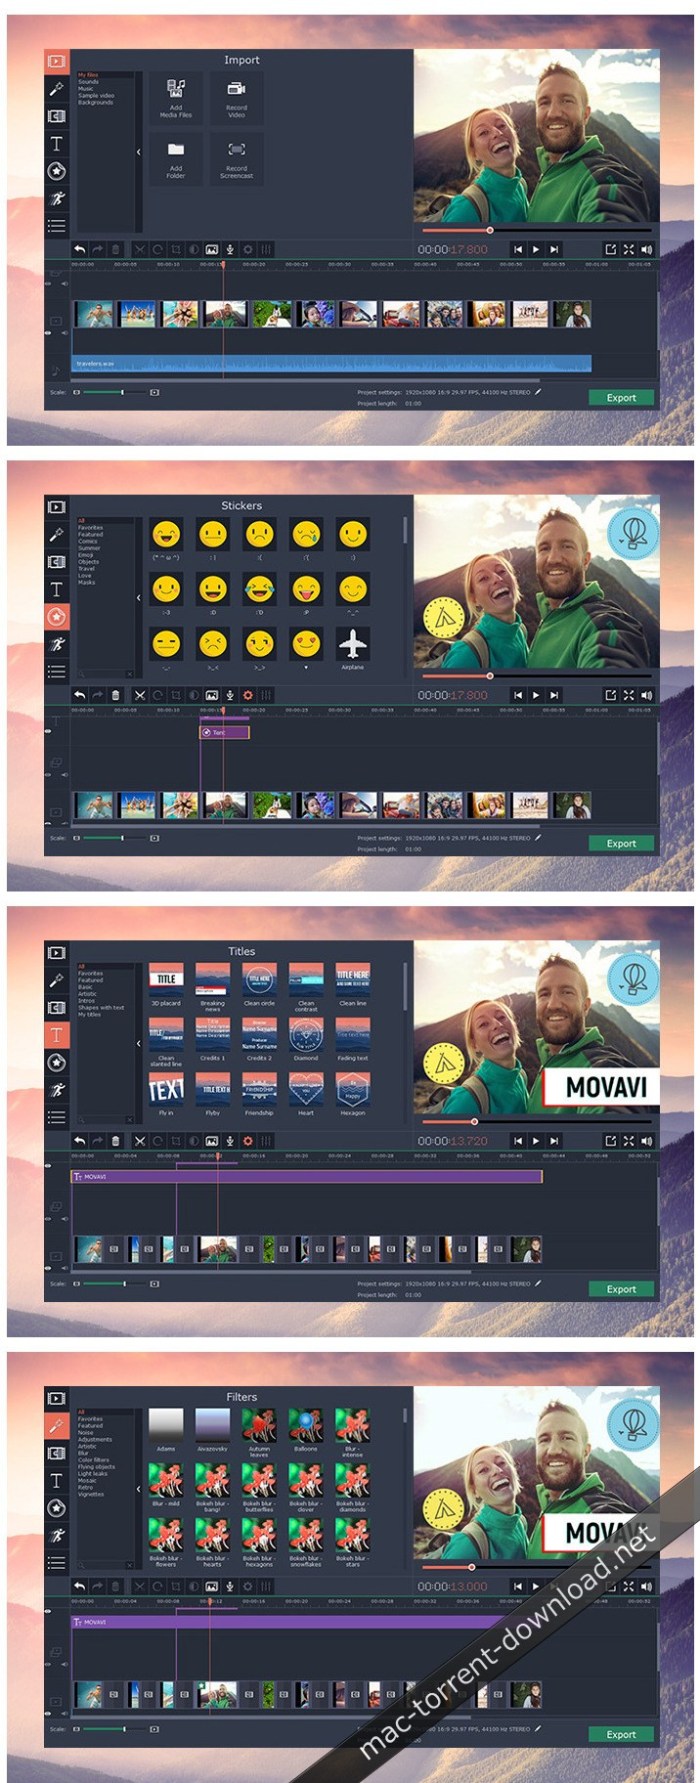 What did the movavi video editor 5 plus for mac upgrade do